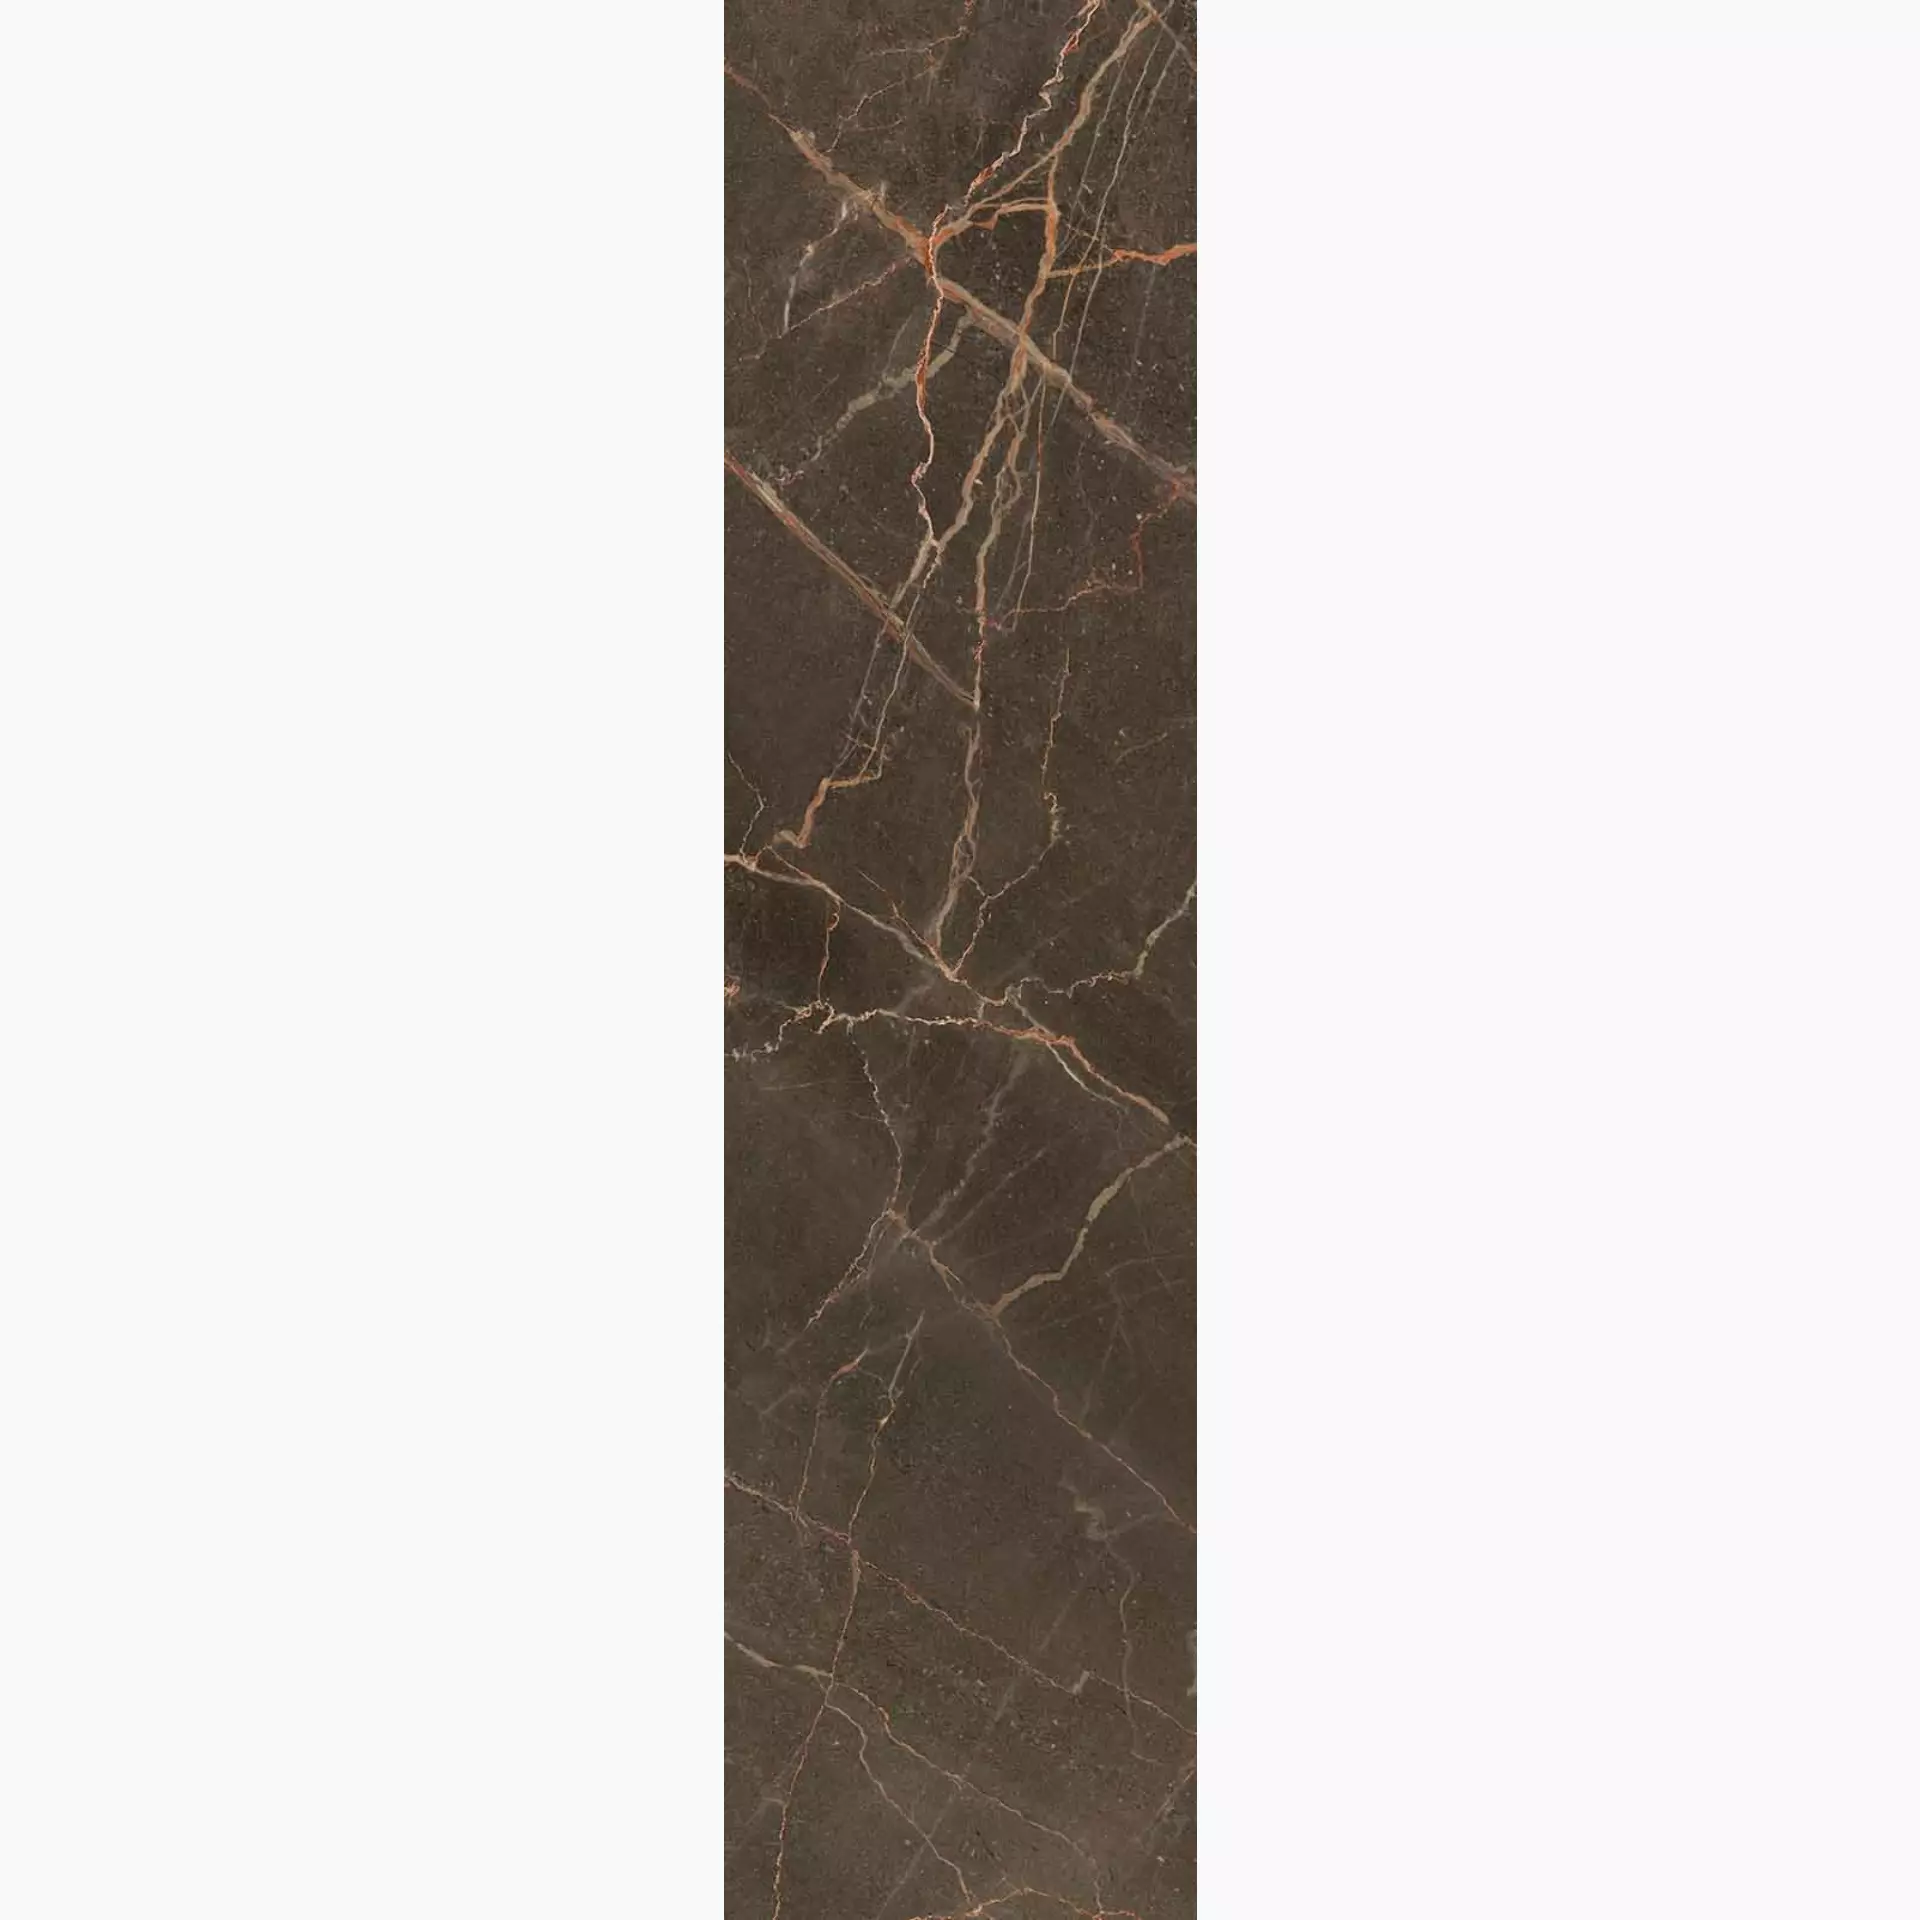 Keope 9Cento Ombra Moca Lappato 46394533 30x120cm rectified 9mm